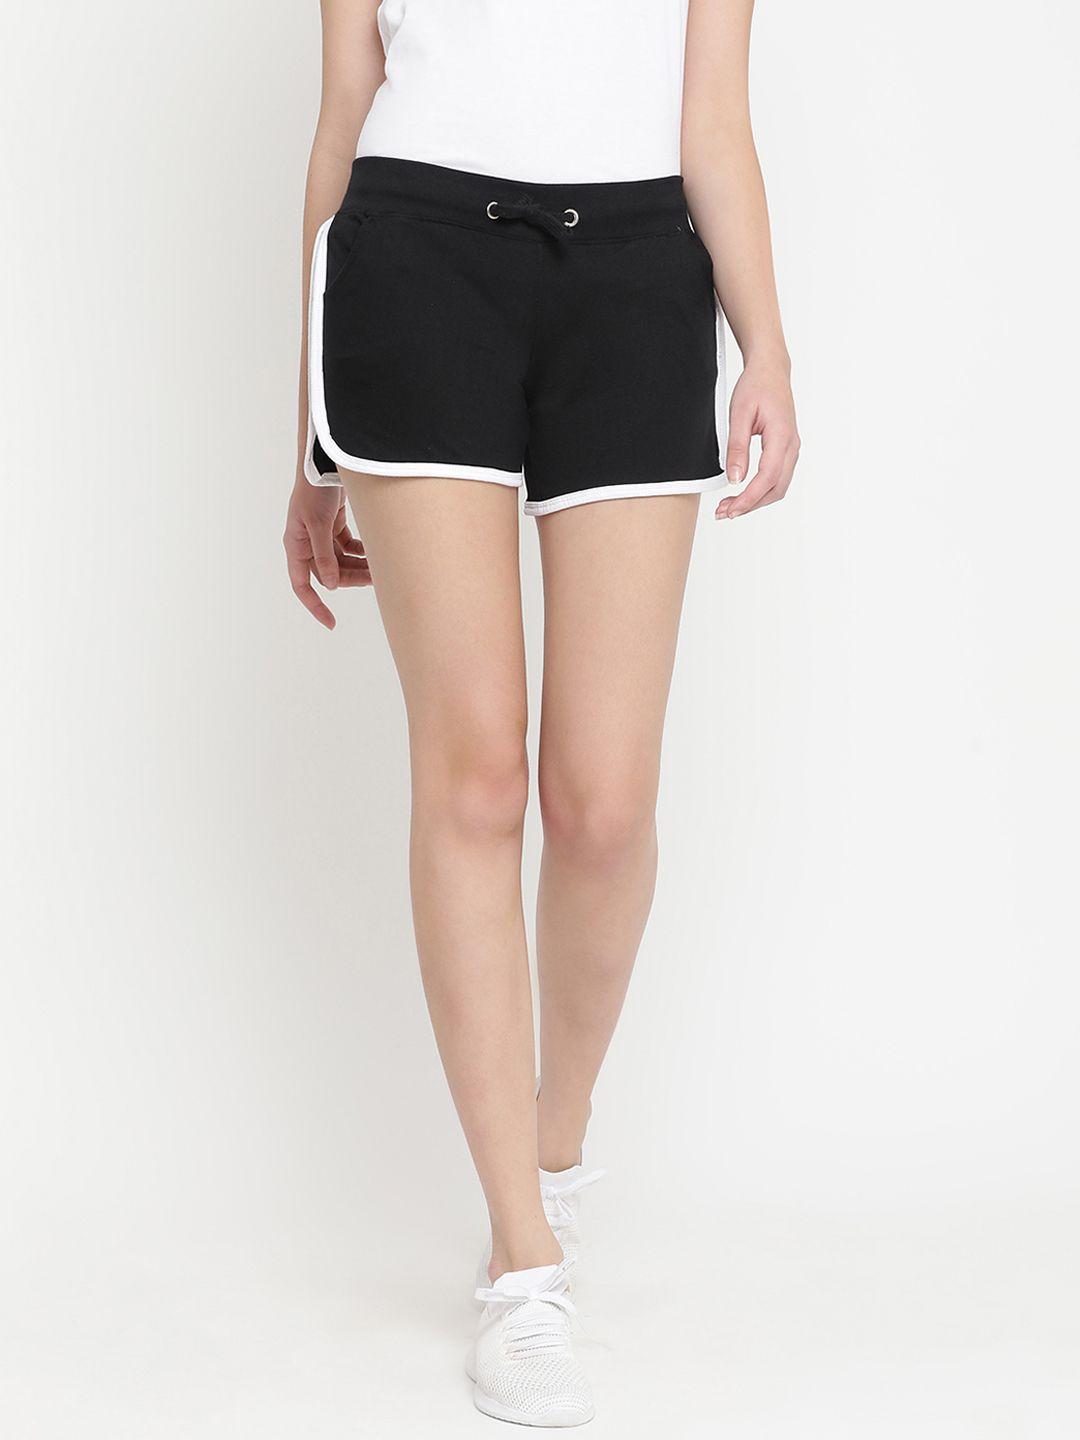 the-dry-state-women-black-solid-slim-fit-regular-shorts